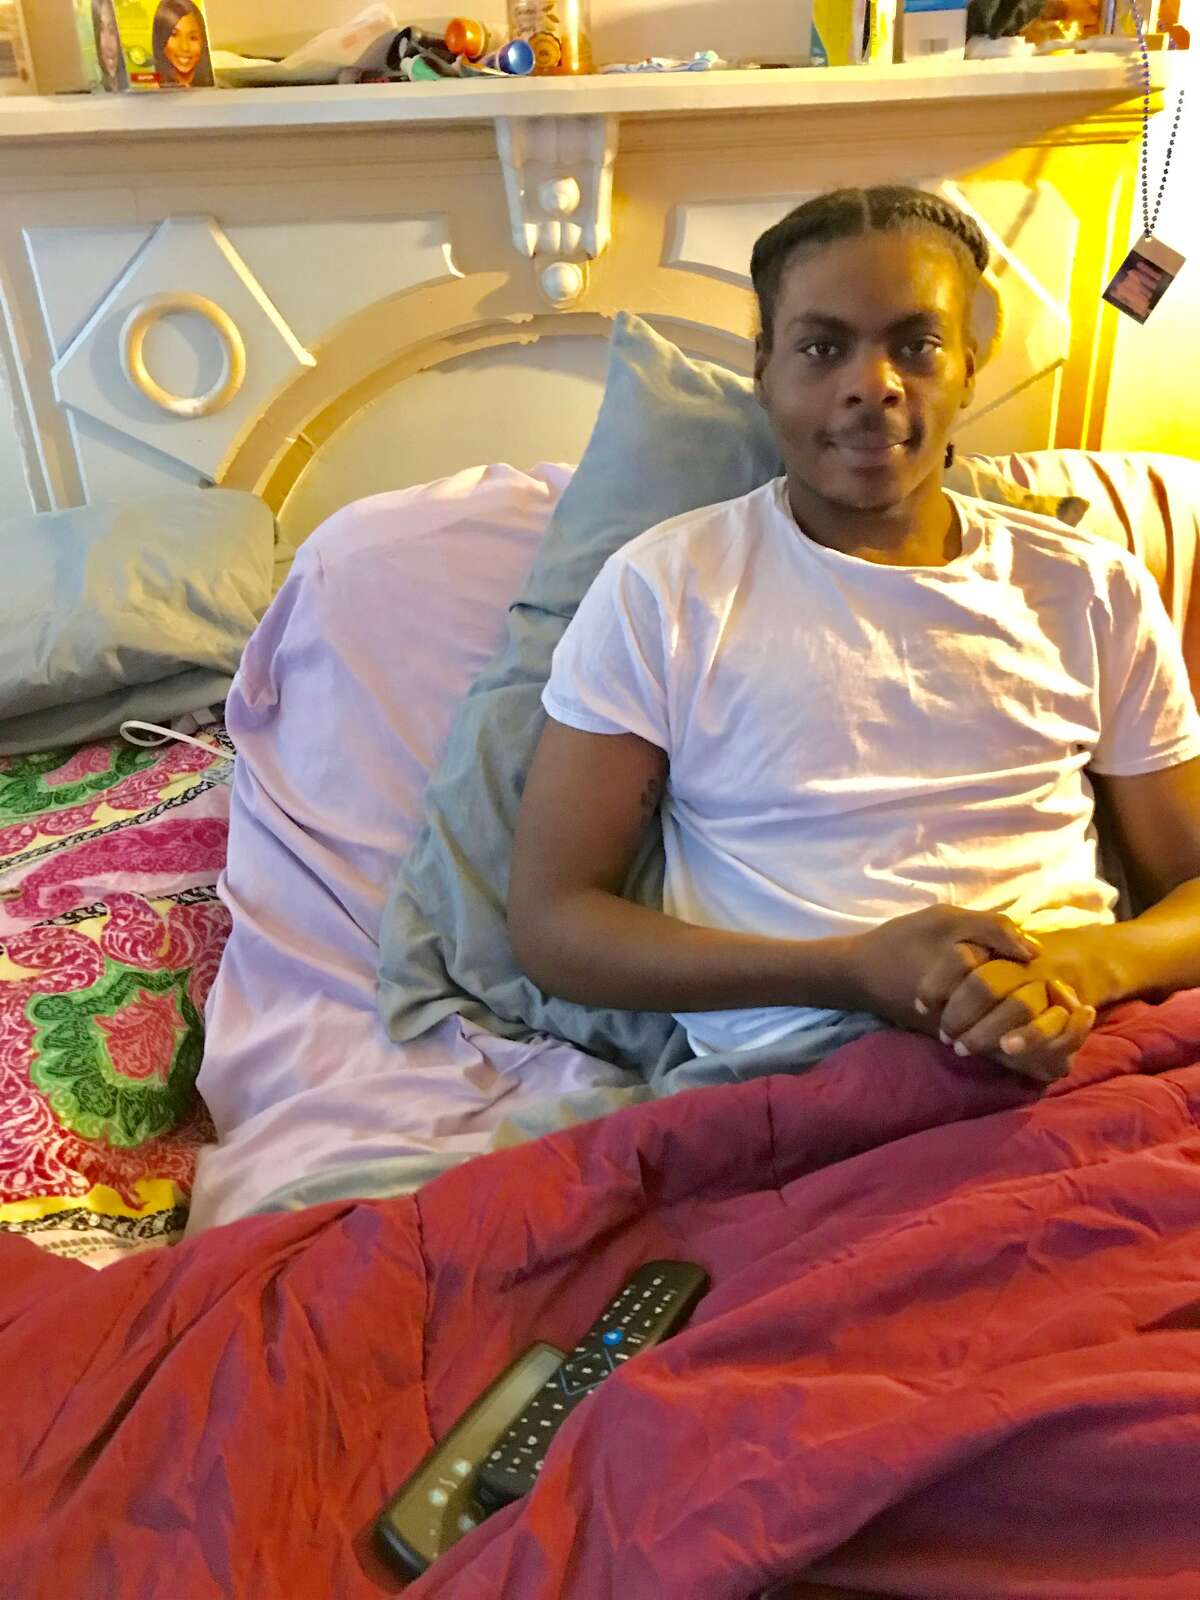 Ellazar Williams, in bed at his Albany apartment. He was paralyzed from the chest down after an Albany police officer shot him on Aug. 20, 2018. Alice Green, director of the Center for Law and Justice, has questioned the police account of the incident and has been working with Ellazar and his girlfriend to get them better situated with an accessible apartment among other needs.